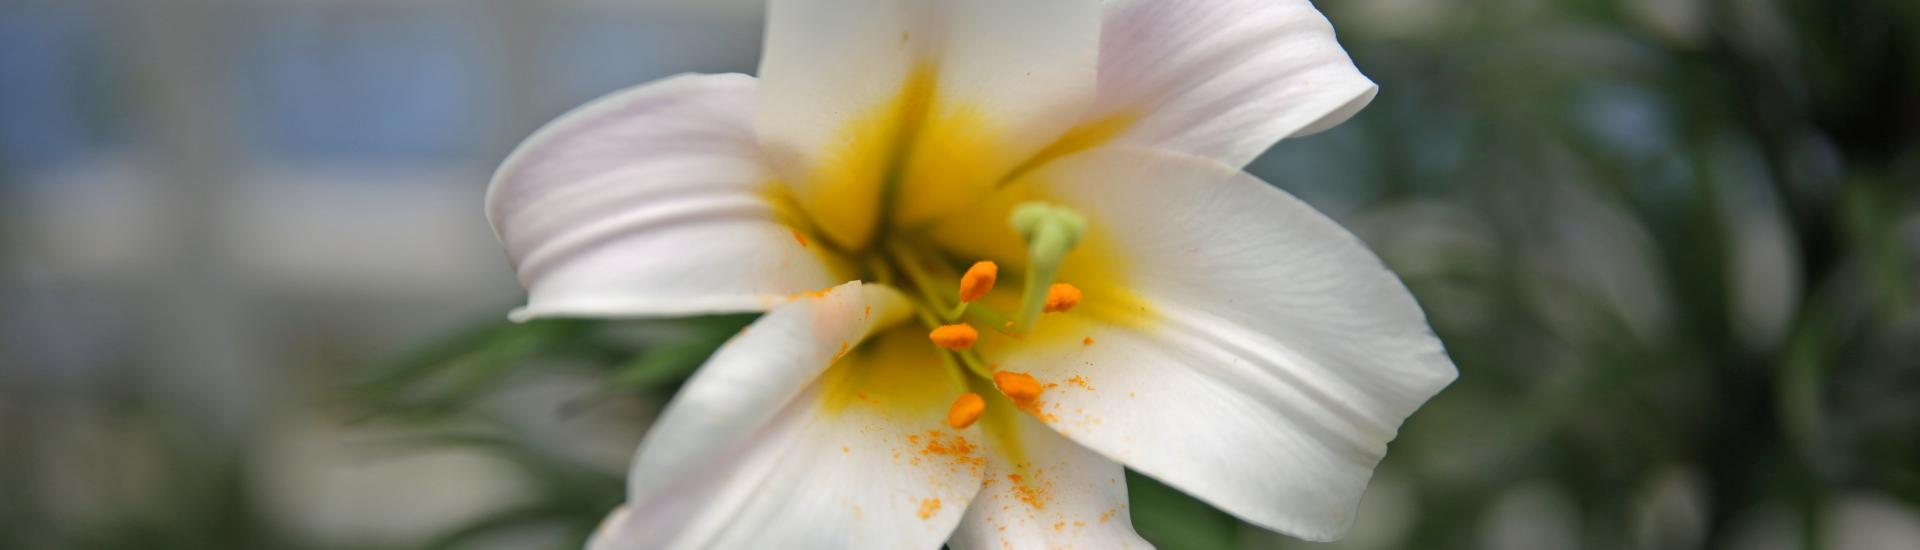 A close up of a white Lilly